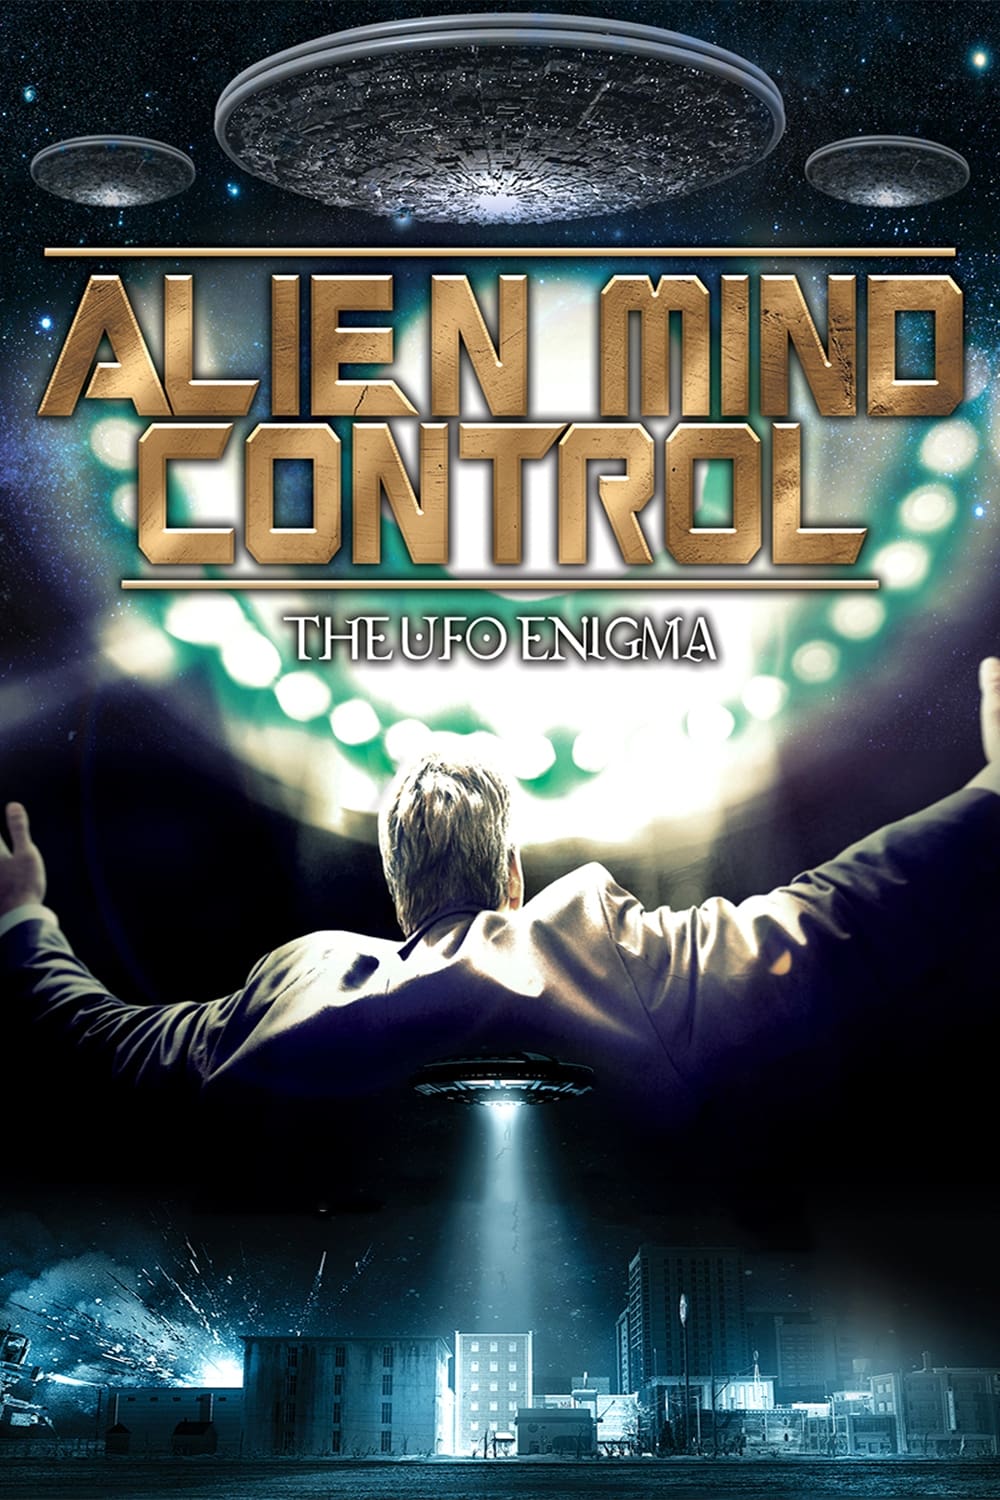 Alien Mind Control: The UFO Enigma on FREECABLE TV